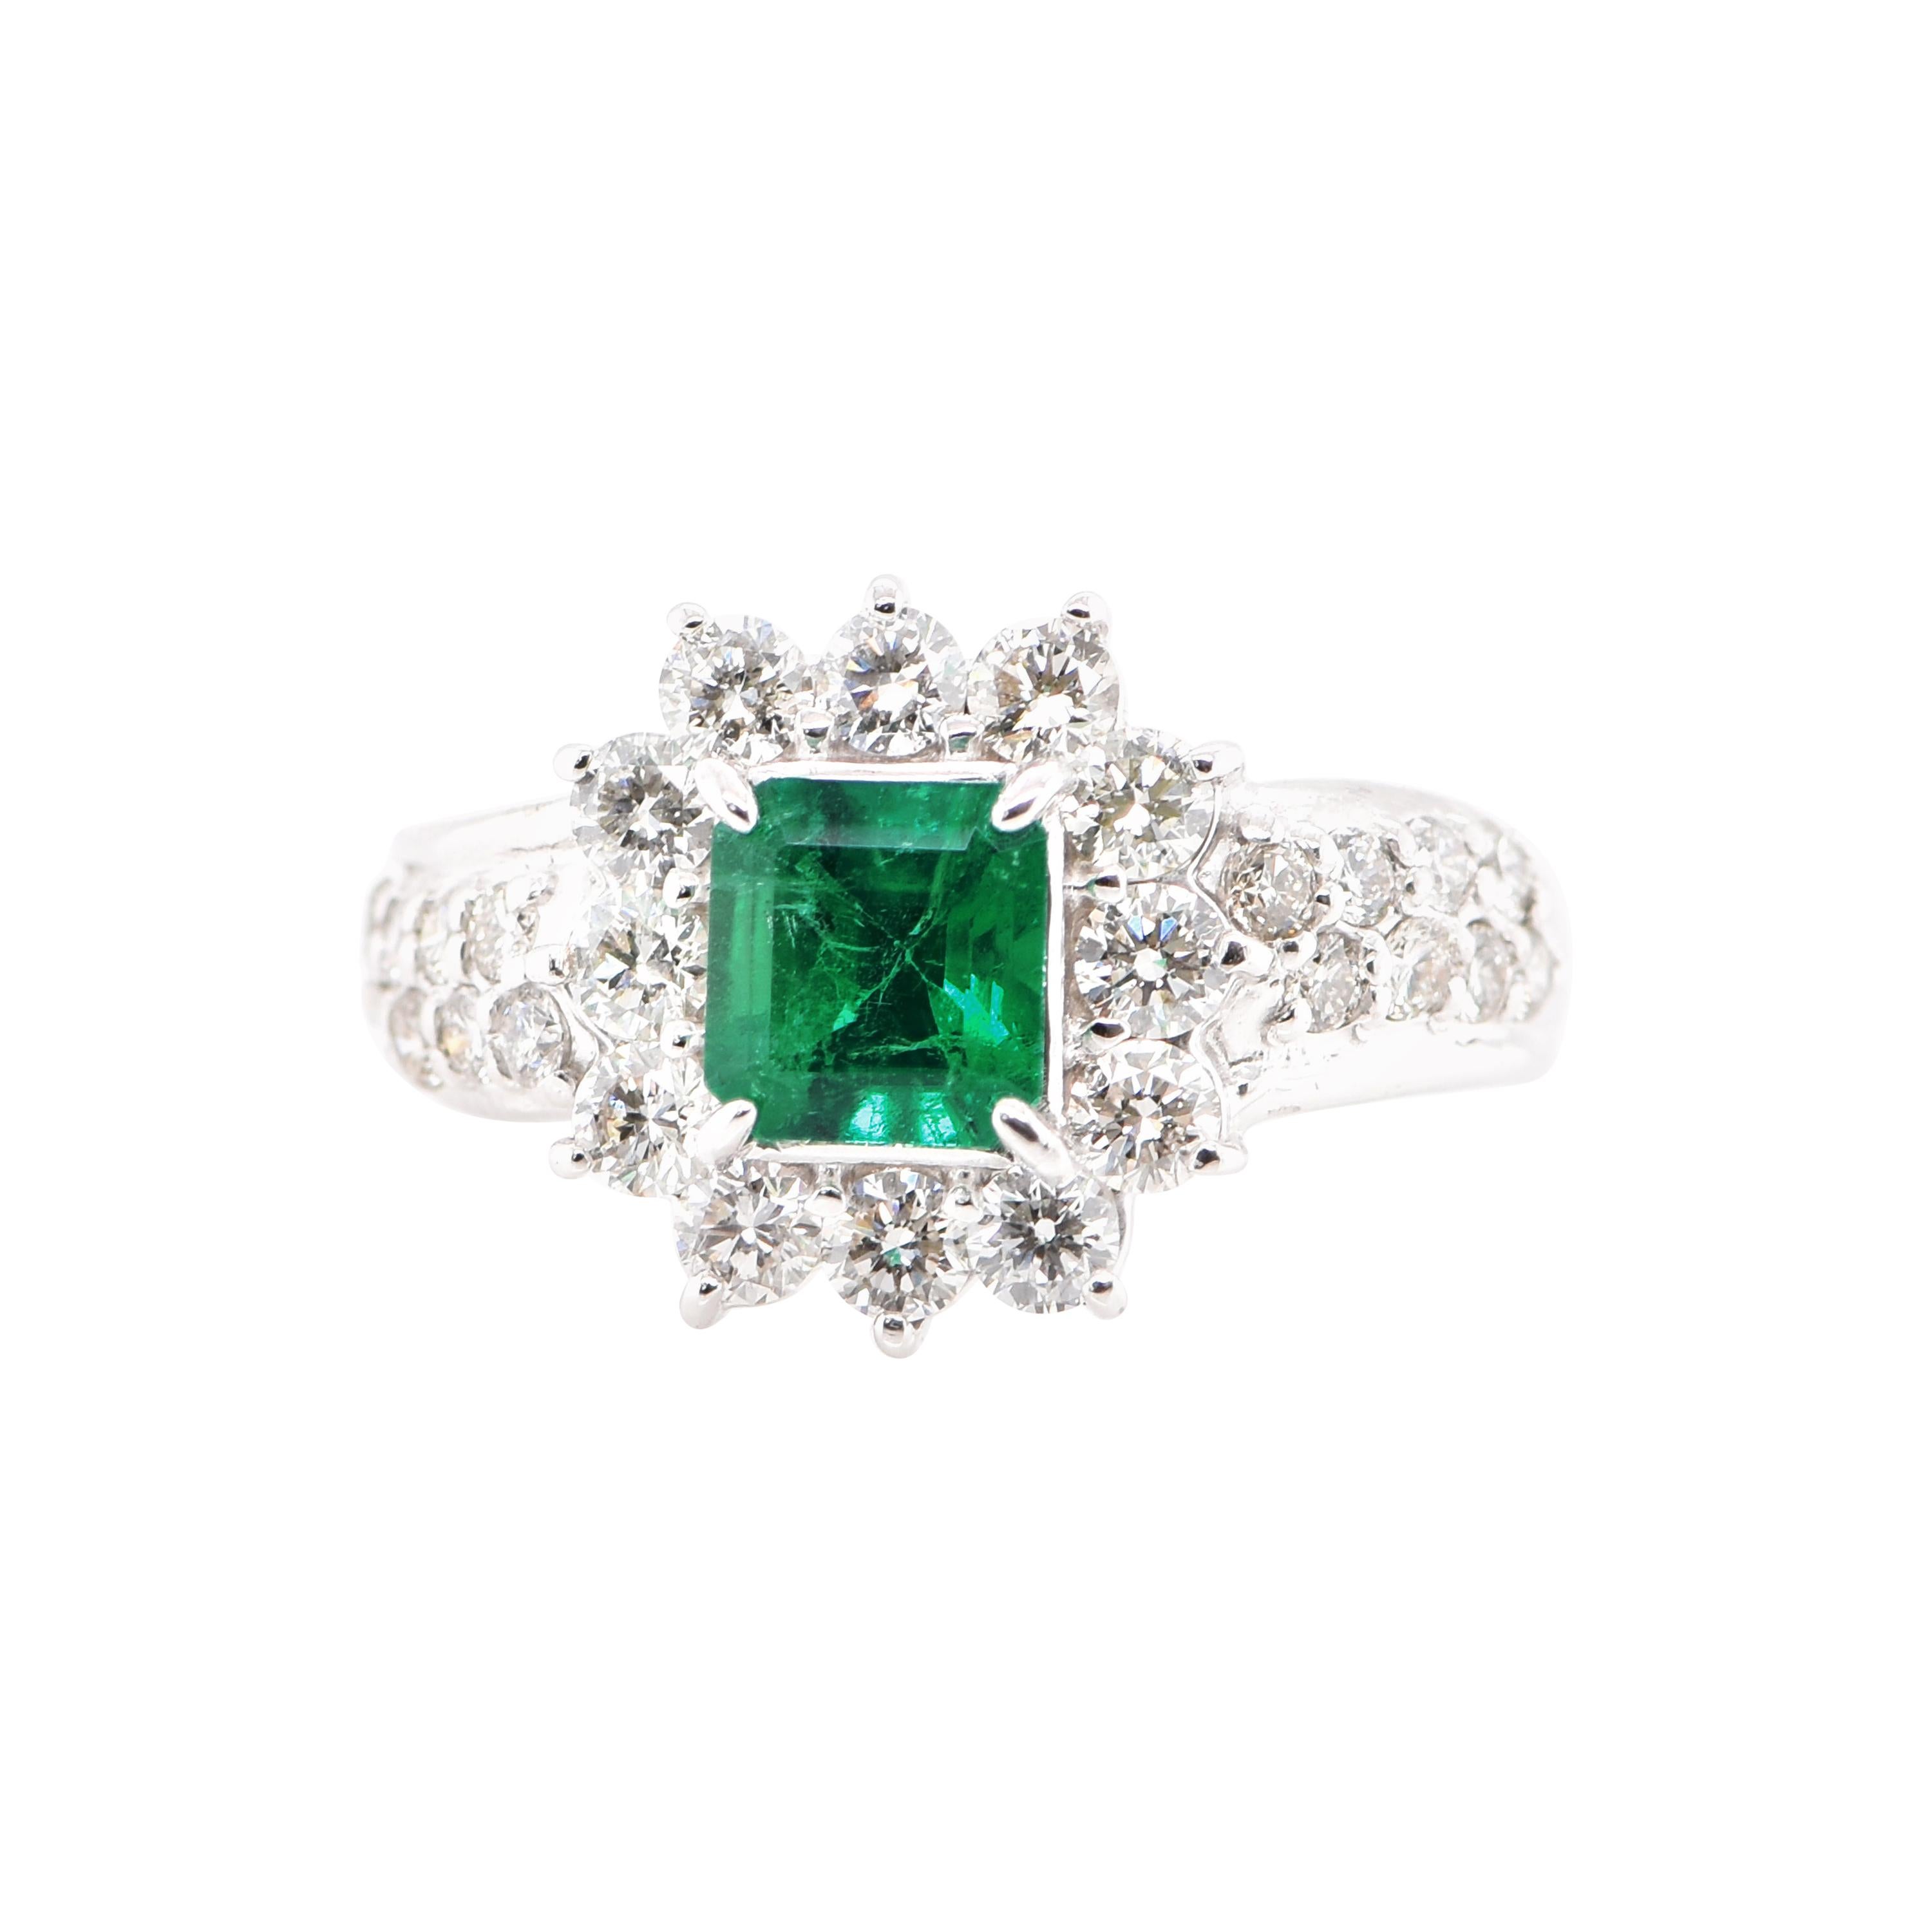 A stunning ring featuring a 0.90 Carat Natural Emerald and 1.20 Carats of Diamond Accents set in Platinum. People have admired emerald’s green for thousands of years. Emeralds have always been associated with the lushest landscapes and the richest